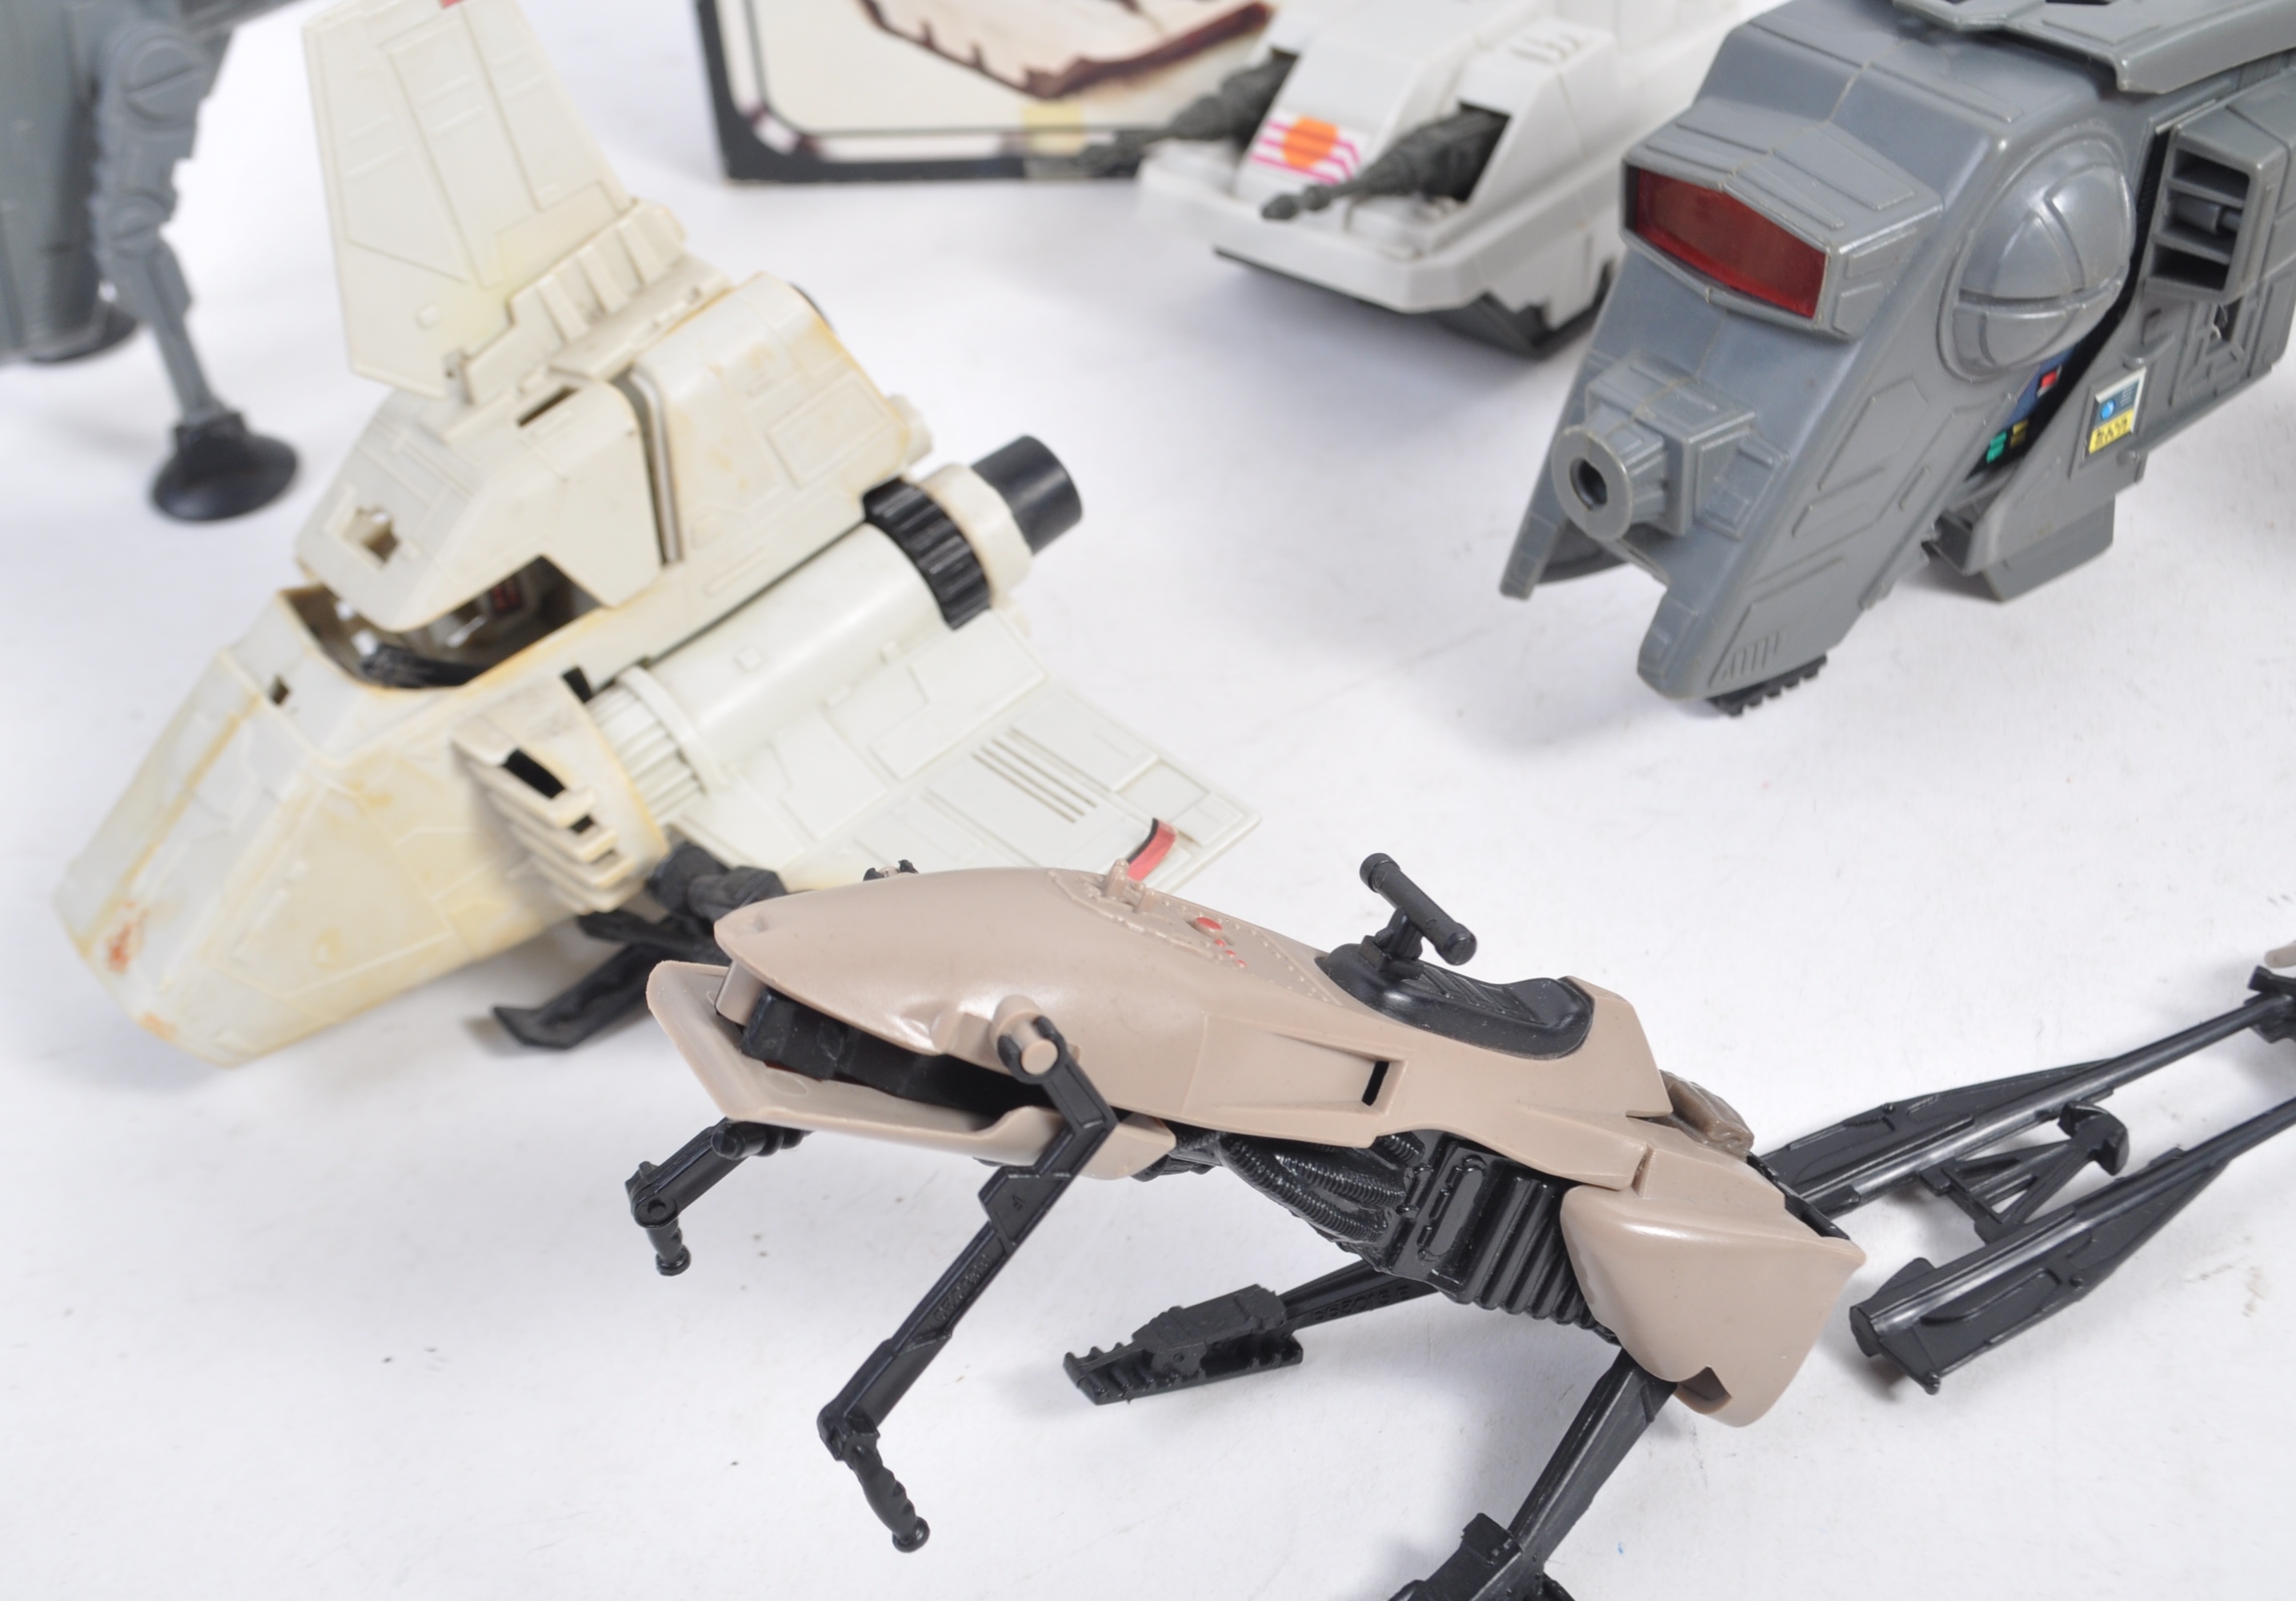 COLLECTION OF VINTAGE PALITOY STAR WARS PLAYSET MINIRIGS - Image 6 of 7